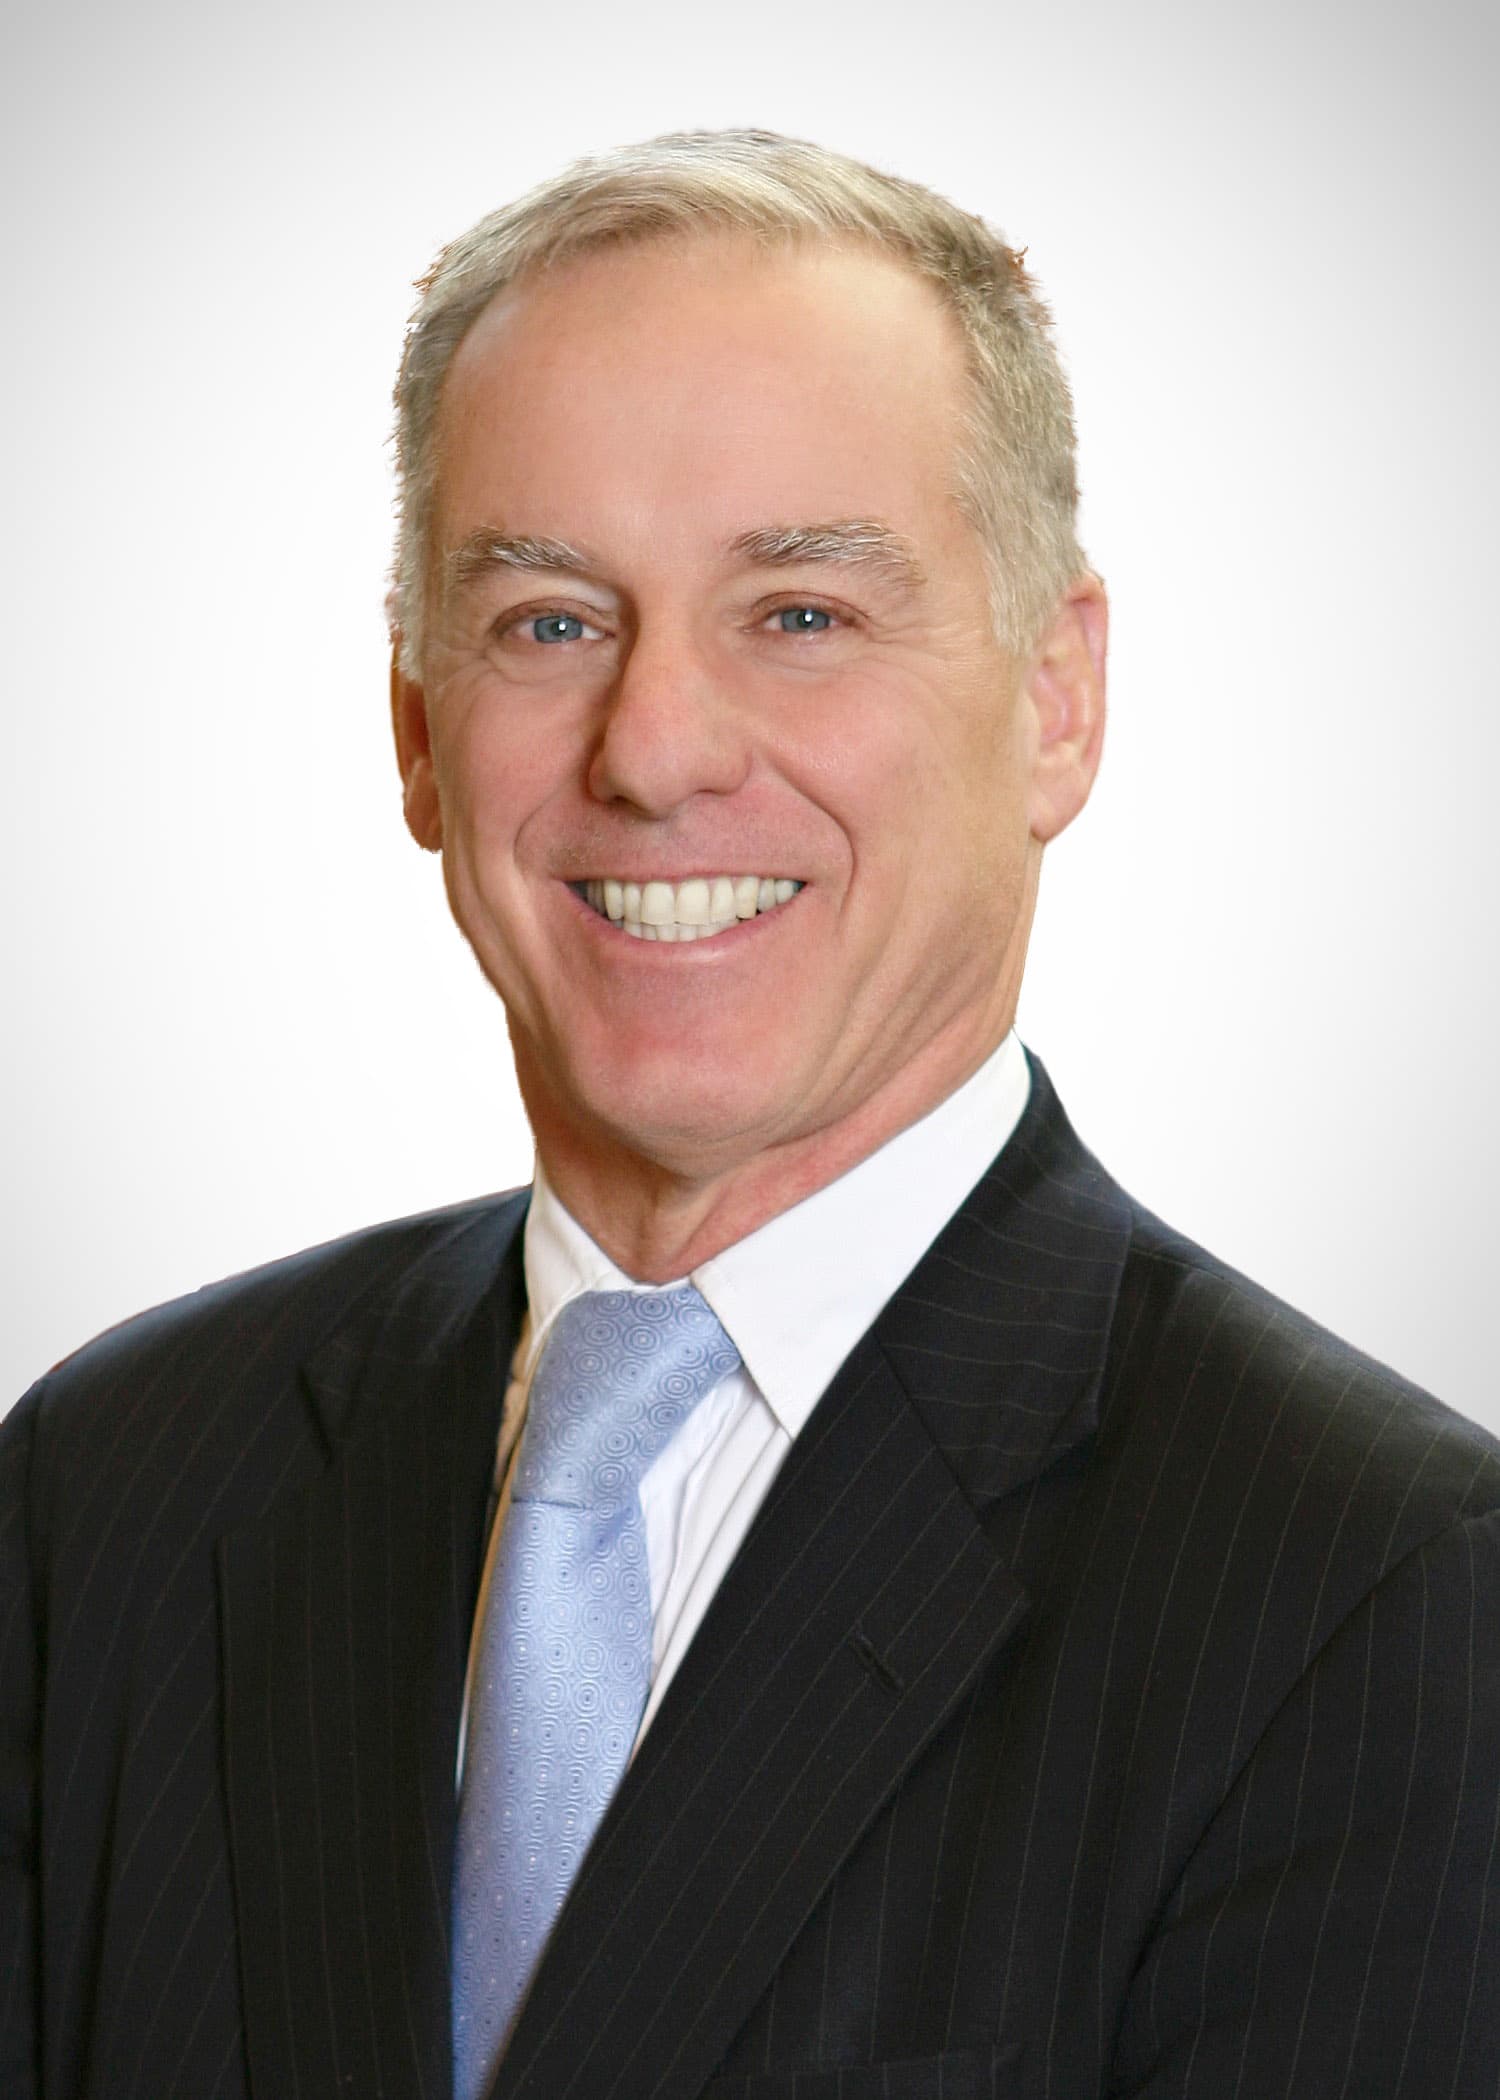 Howard Dean Biography And Net Worth